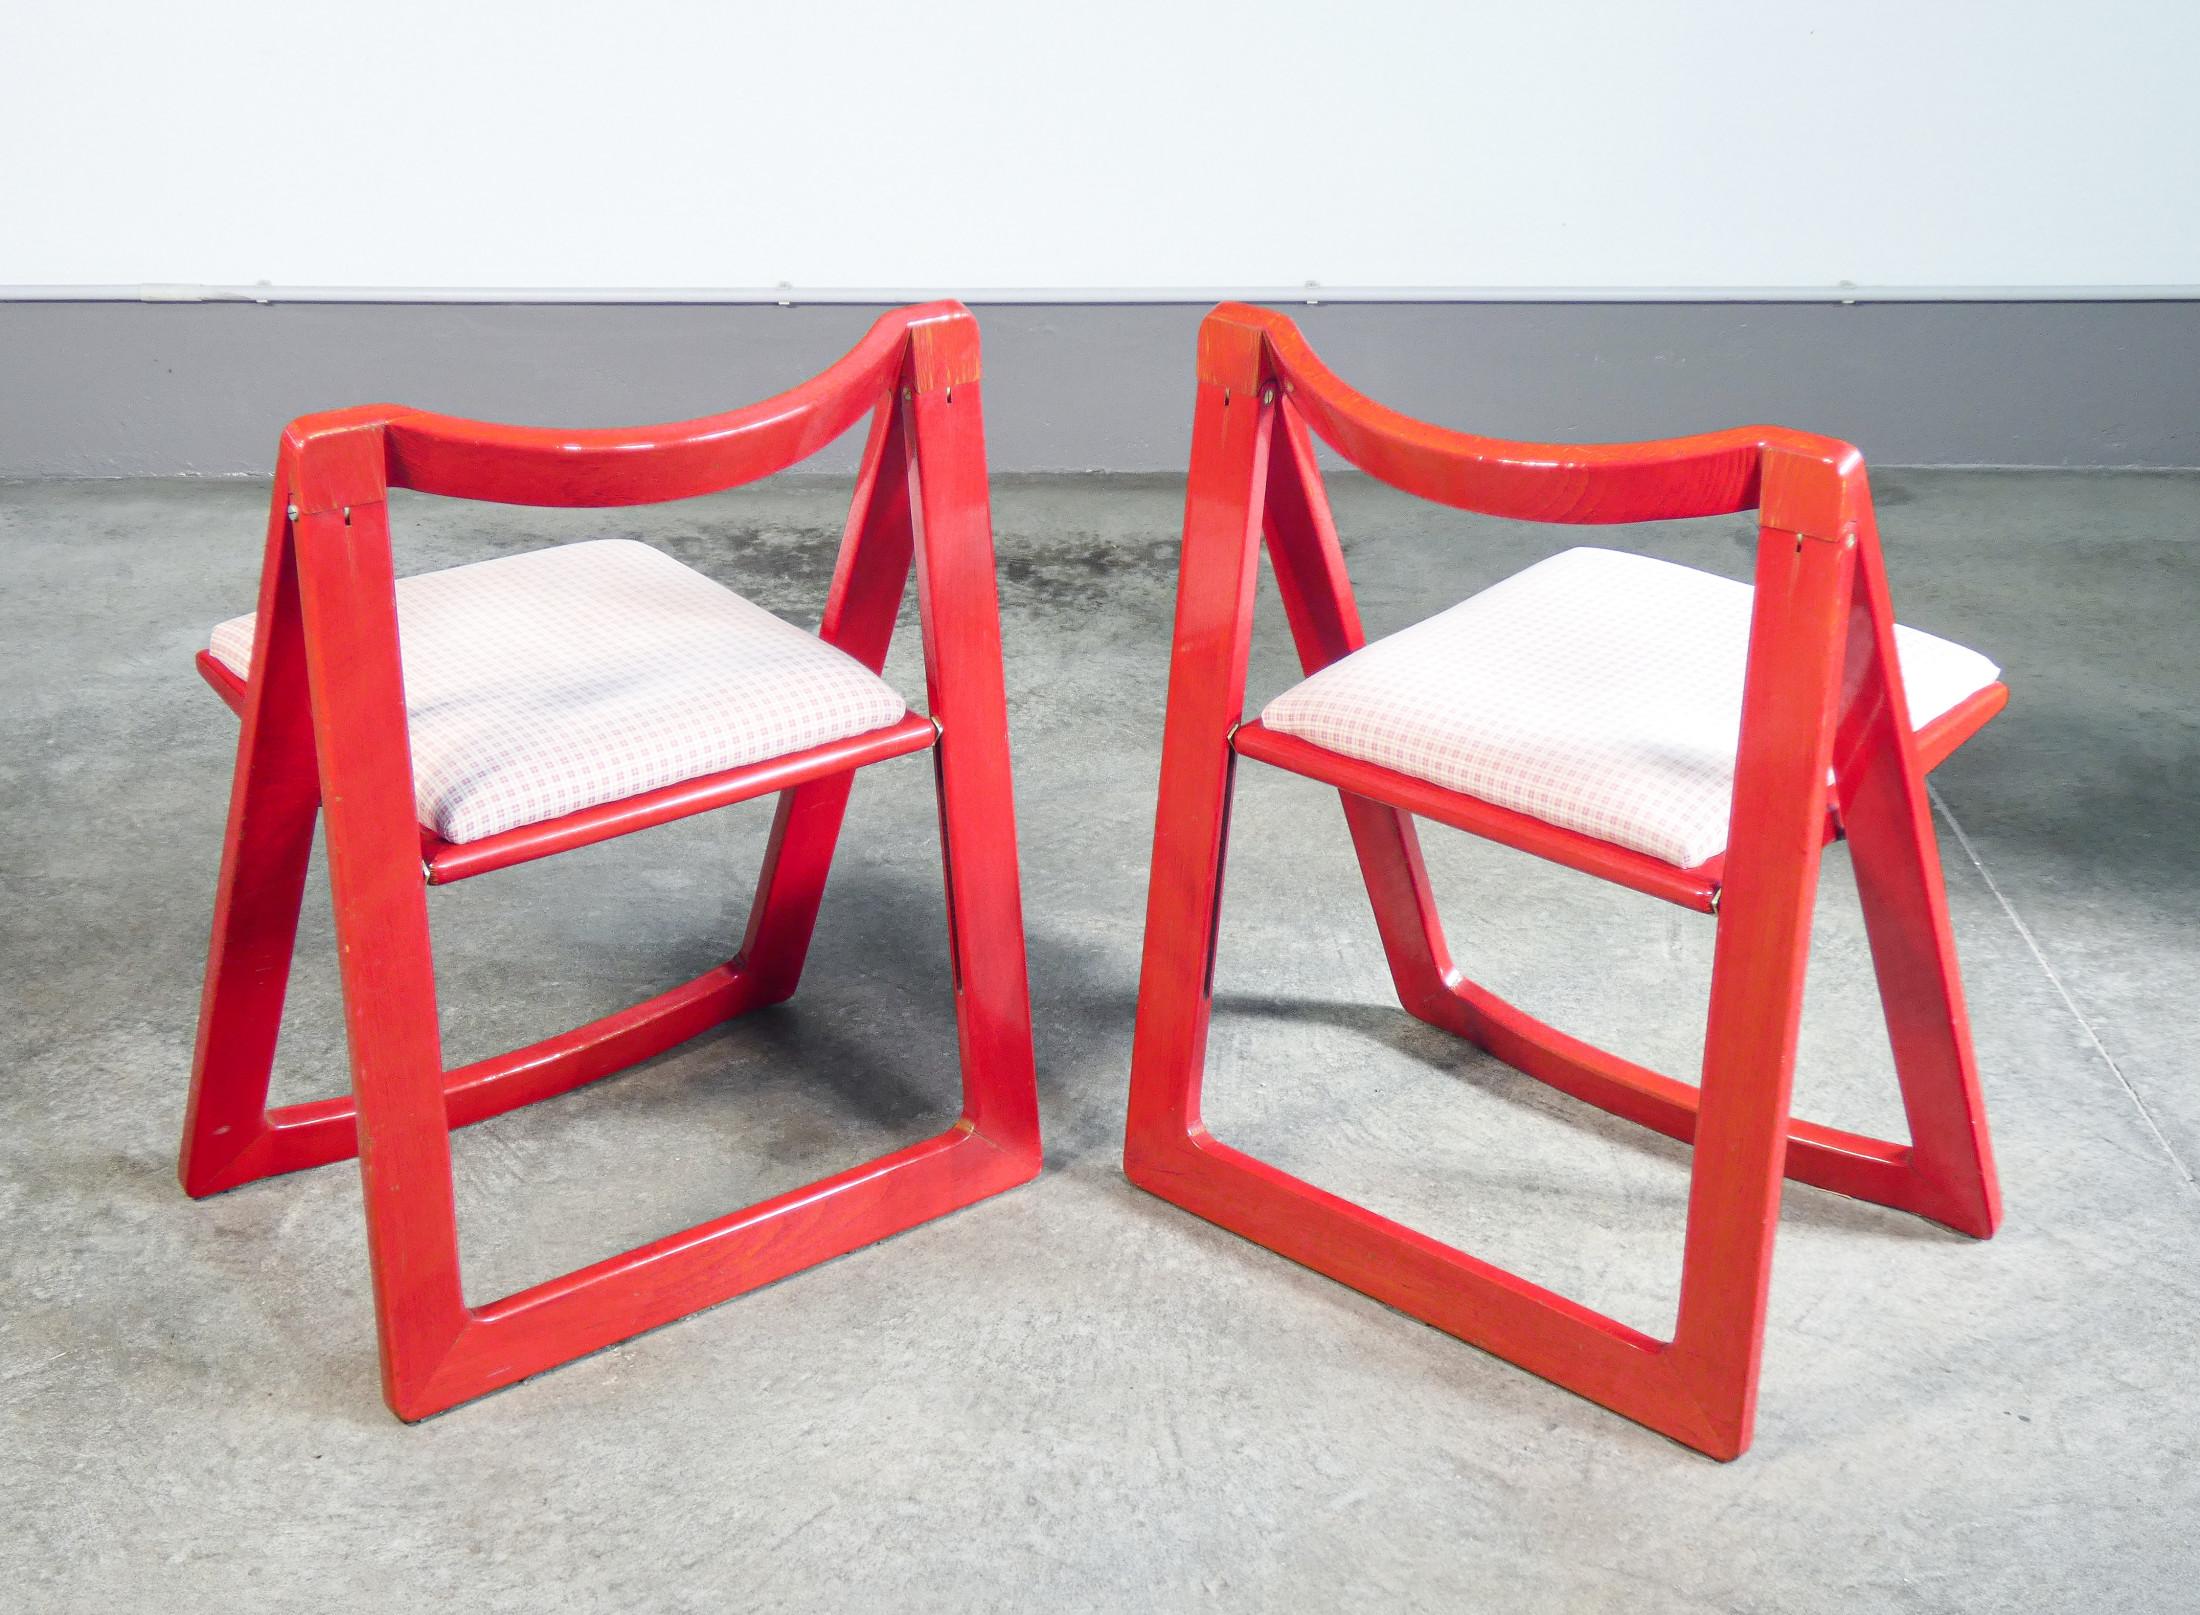 Set of four TRIESTE chairs, designed by D'ANIELLO & JACOBER for BAZZANI, red. '66 For Sale 4